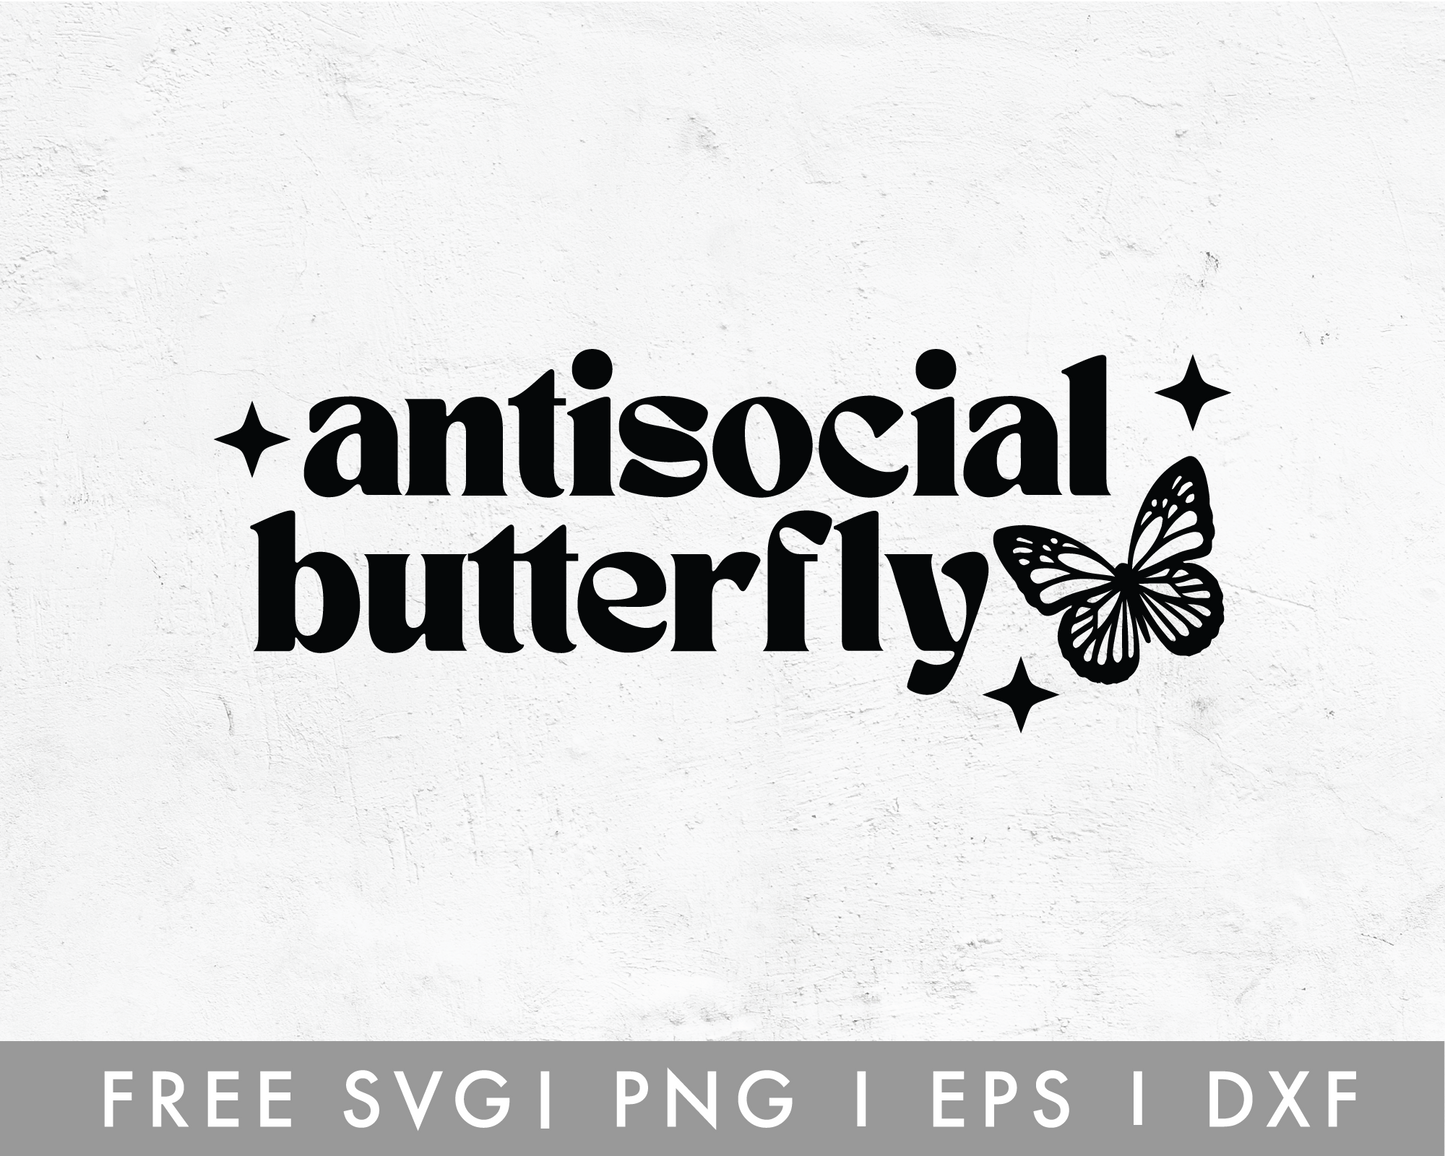 FREE Antisocial Butterfly SVG Cut File for Cricut, Cameo Silhouette | Free SVG Cut File